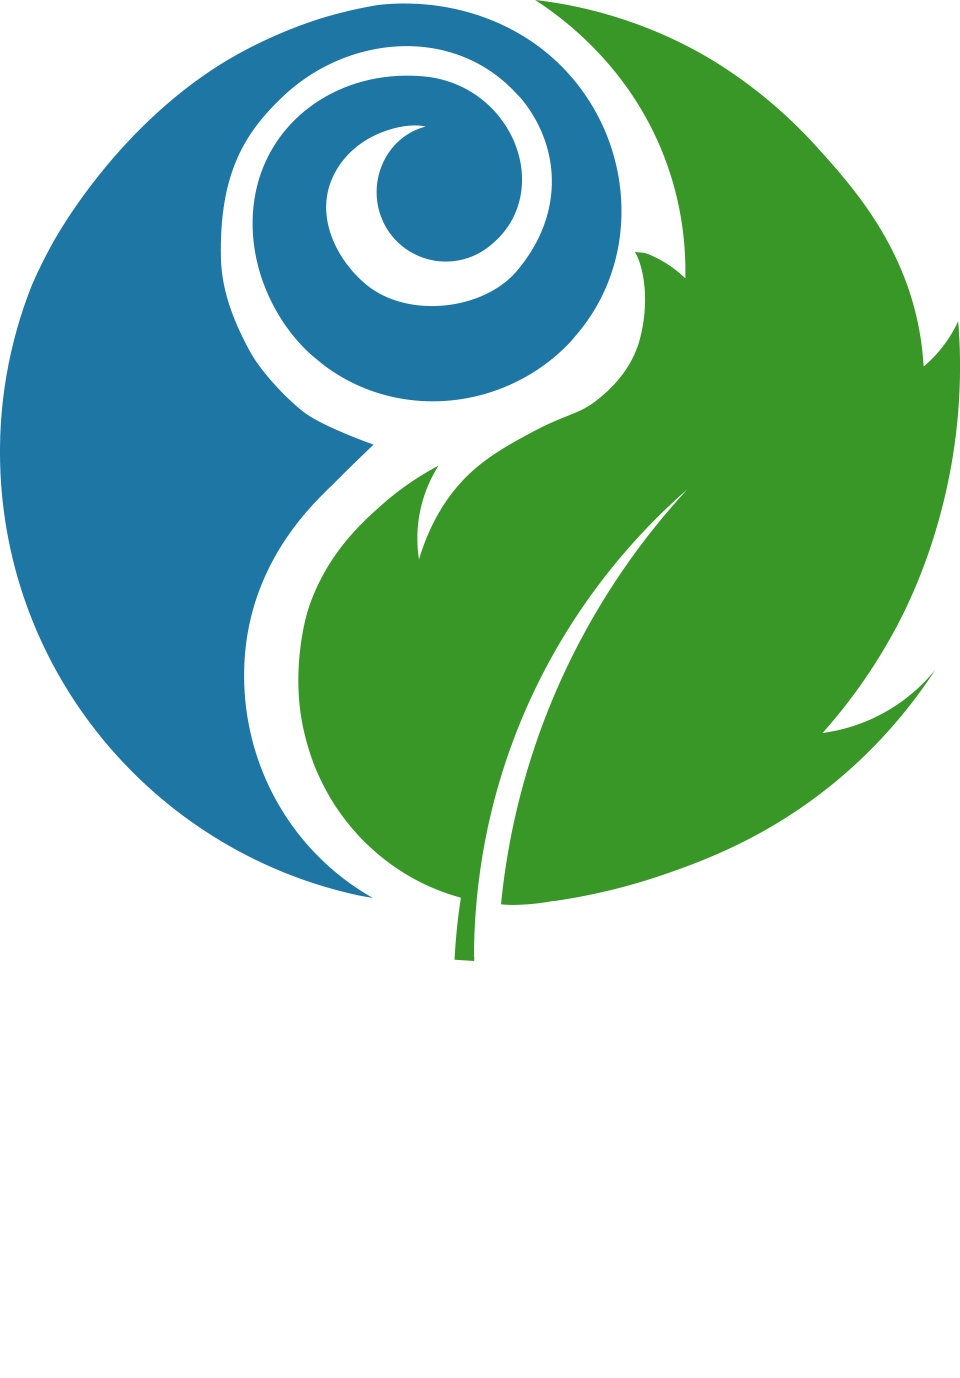 Oceans to Earth